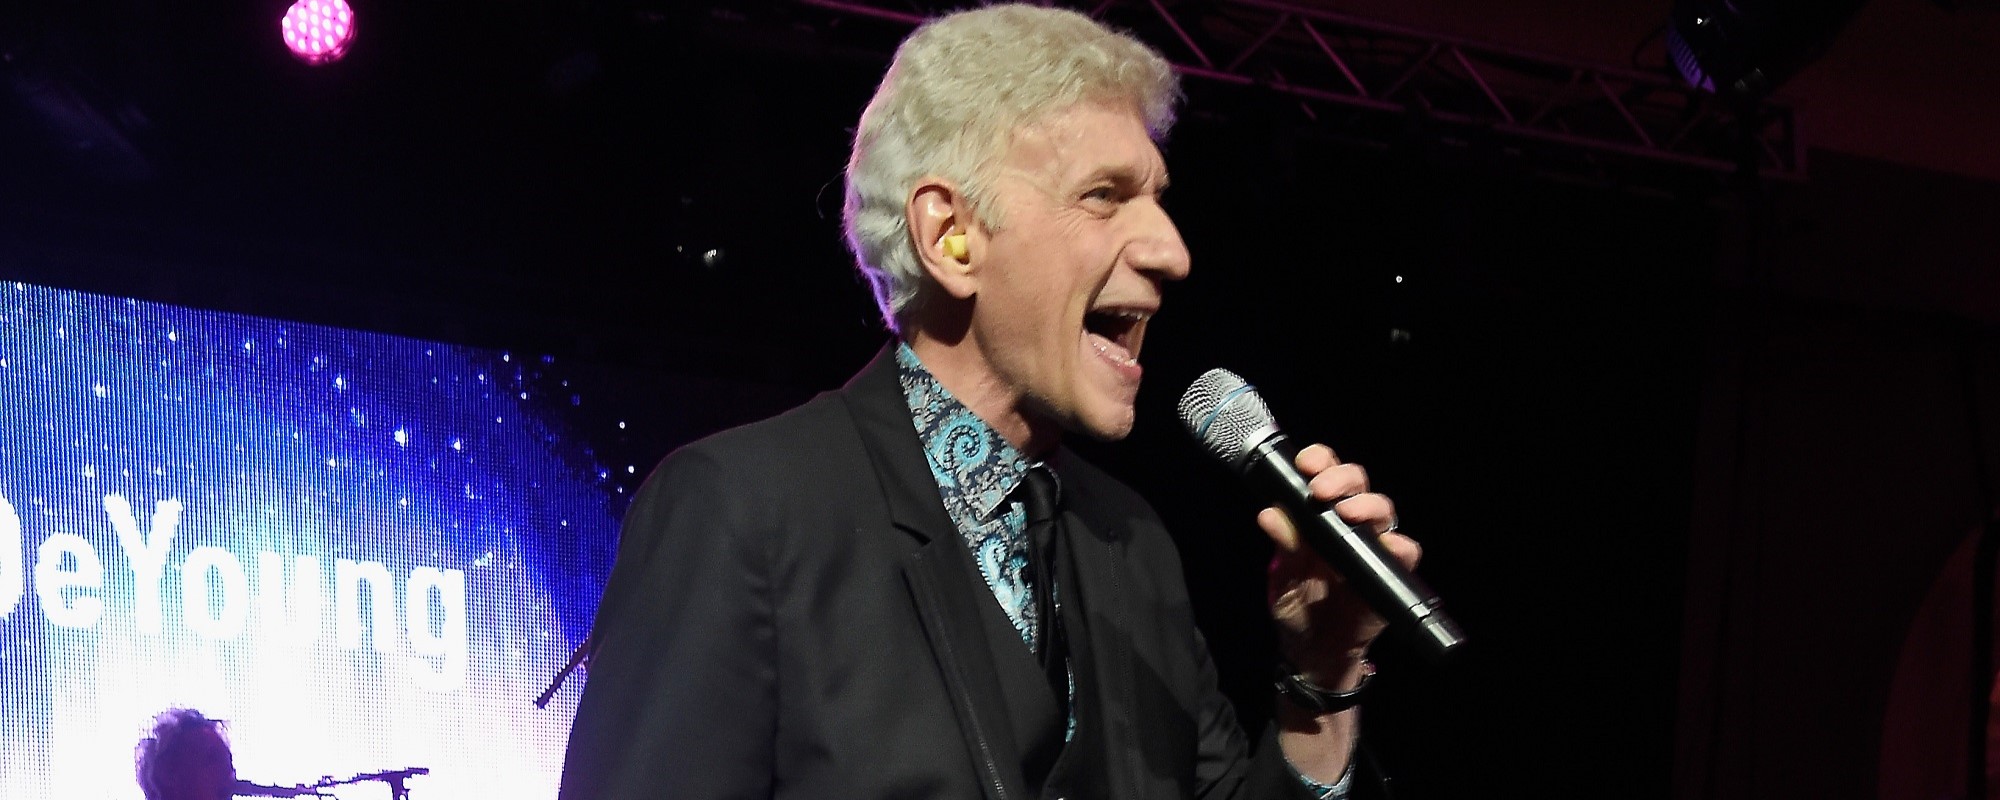 Ex-Styx Member Dennis DeYoung Shares What He Feels Is “the Most Hurtful Part” of His Former Bandmates’ Rift with Him